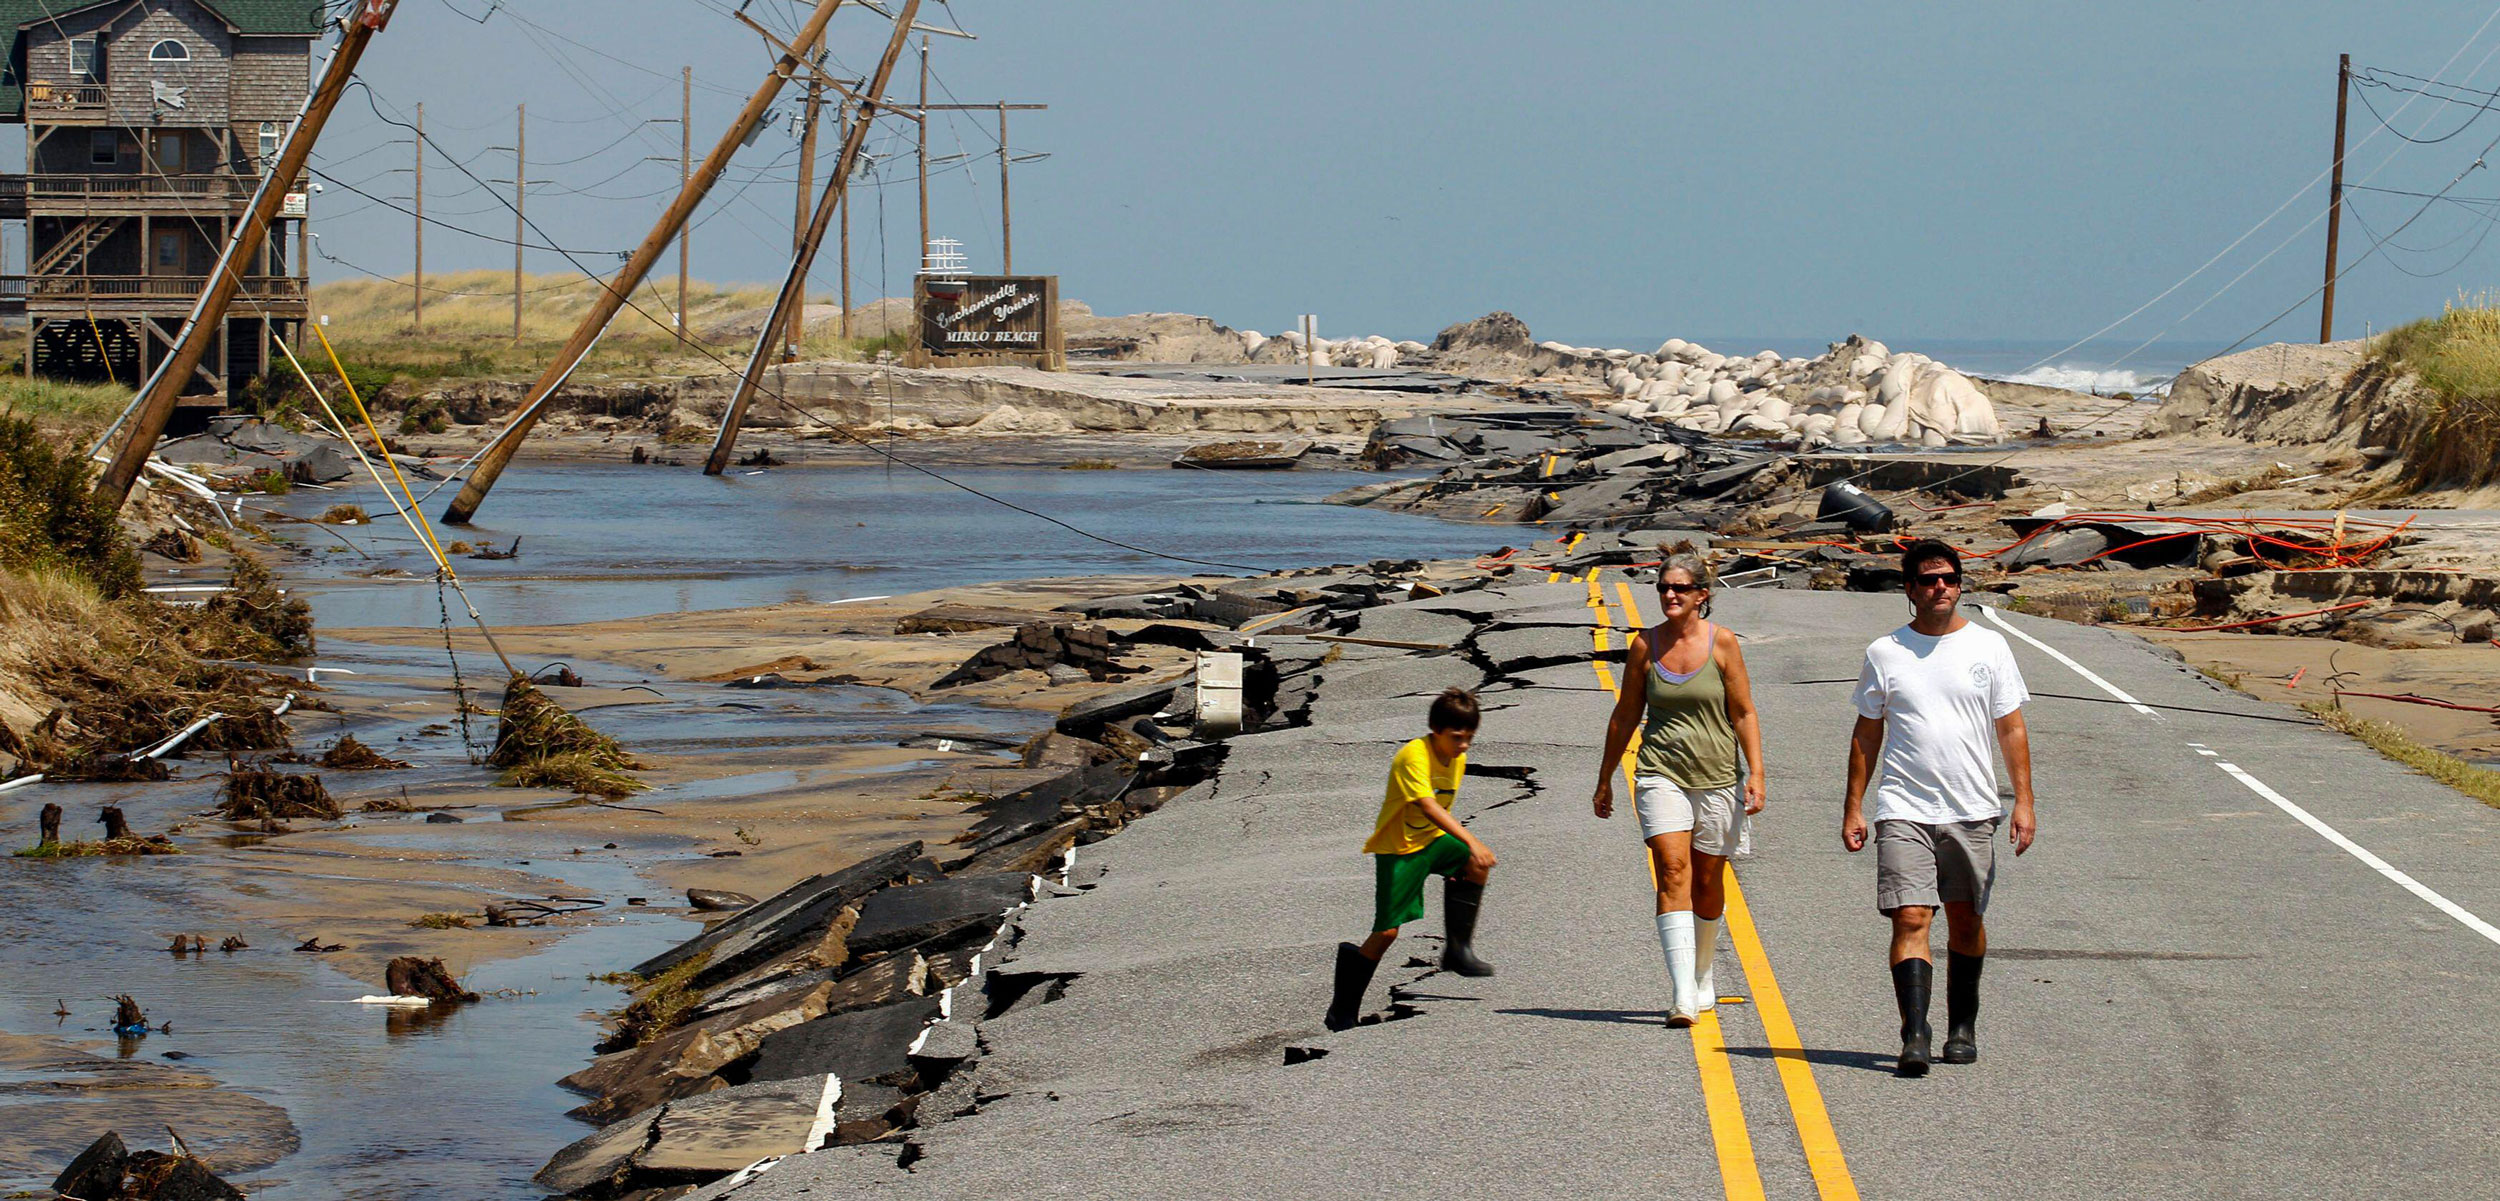 Residents walk along a highway in North Carolina after it was destroyed by Hurricane Irene